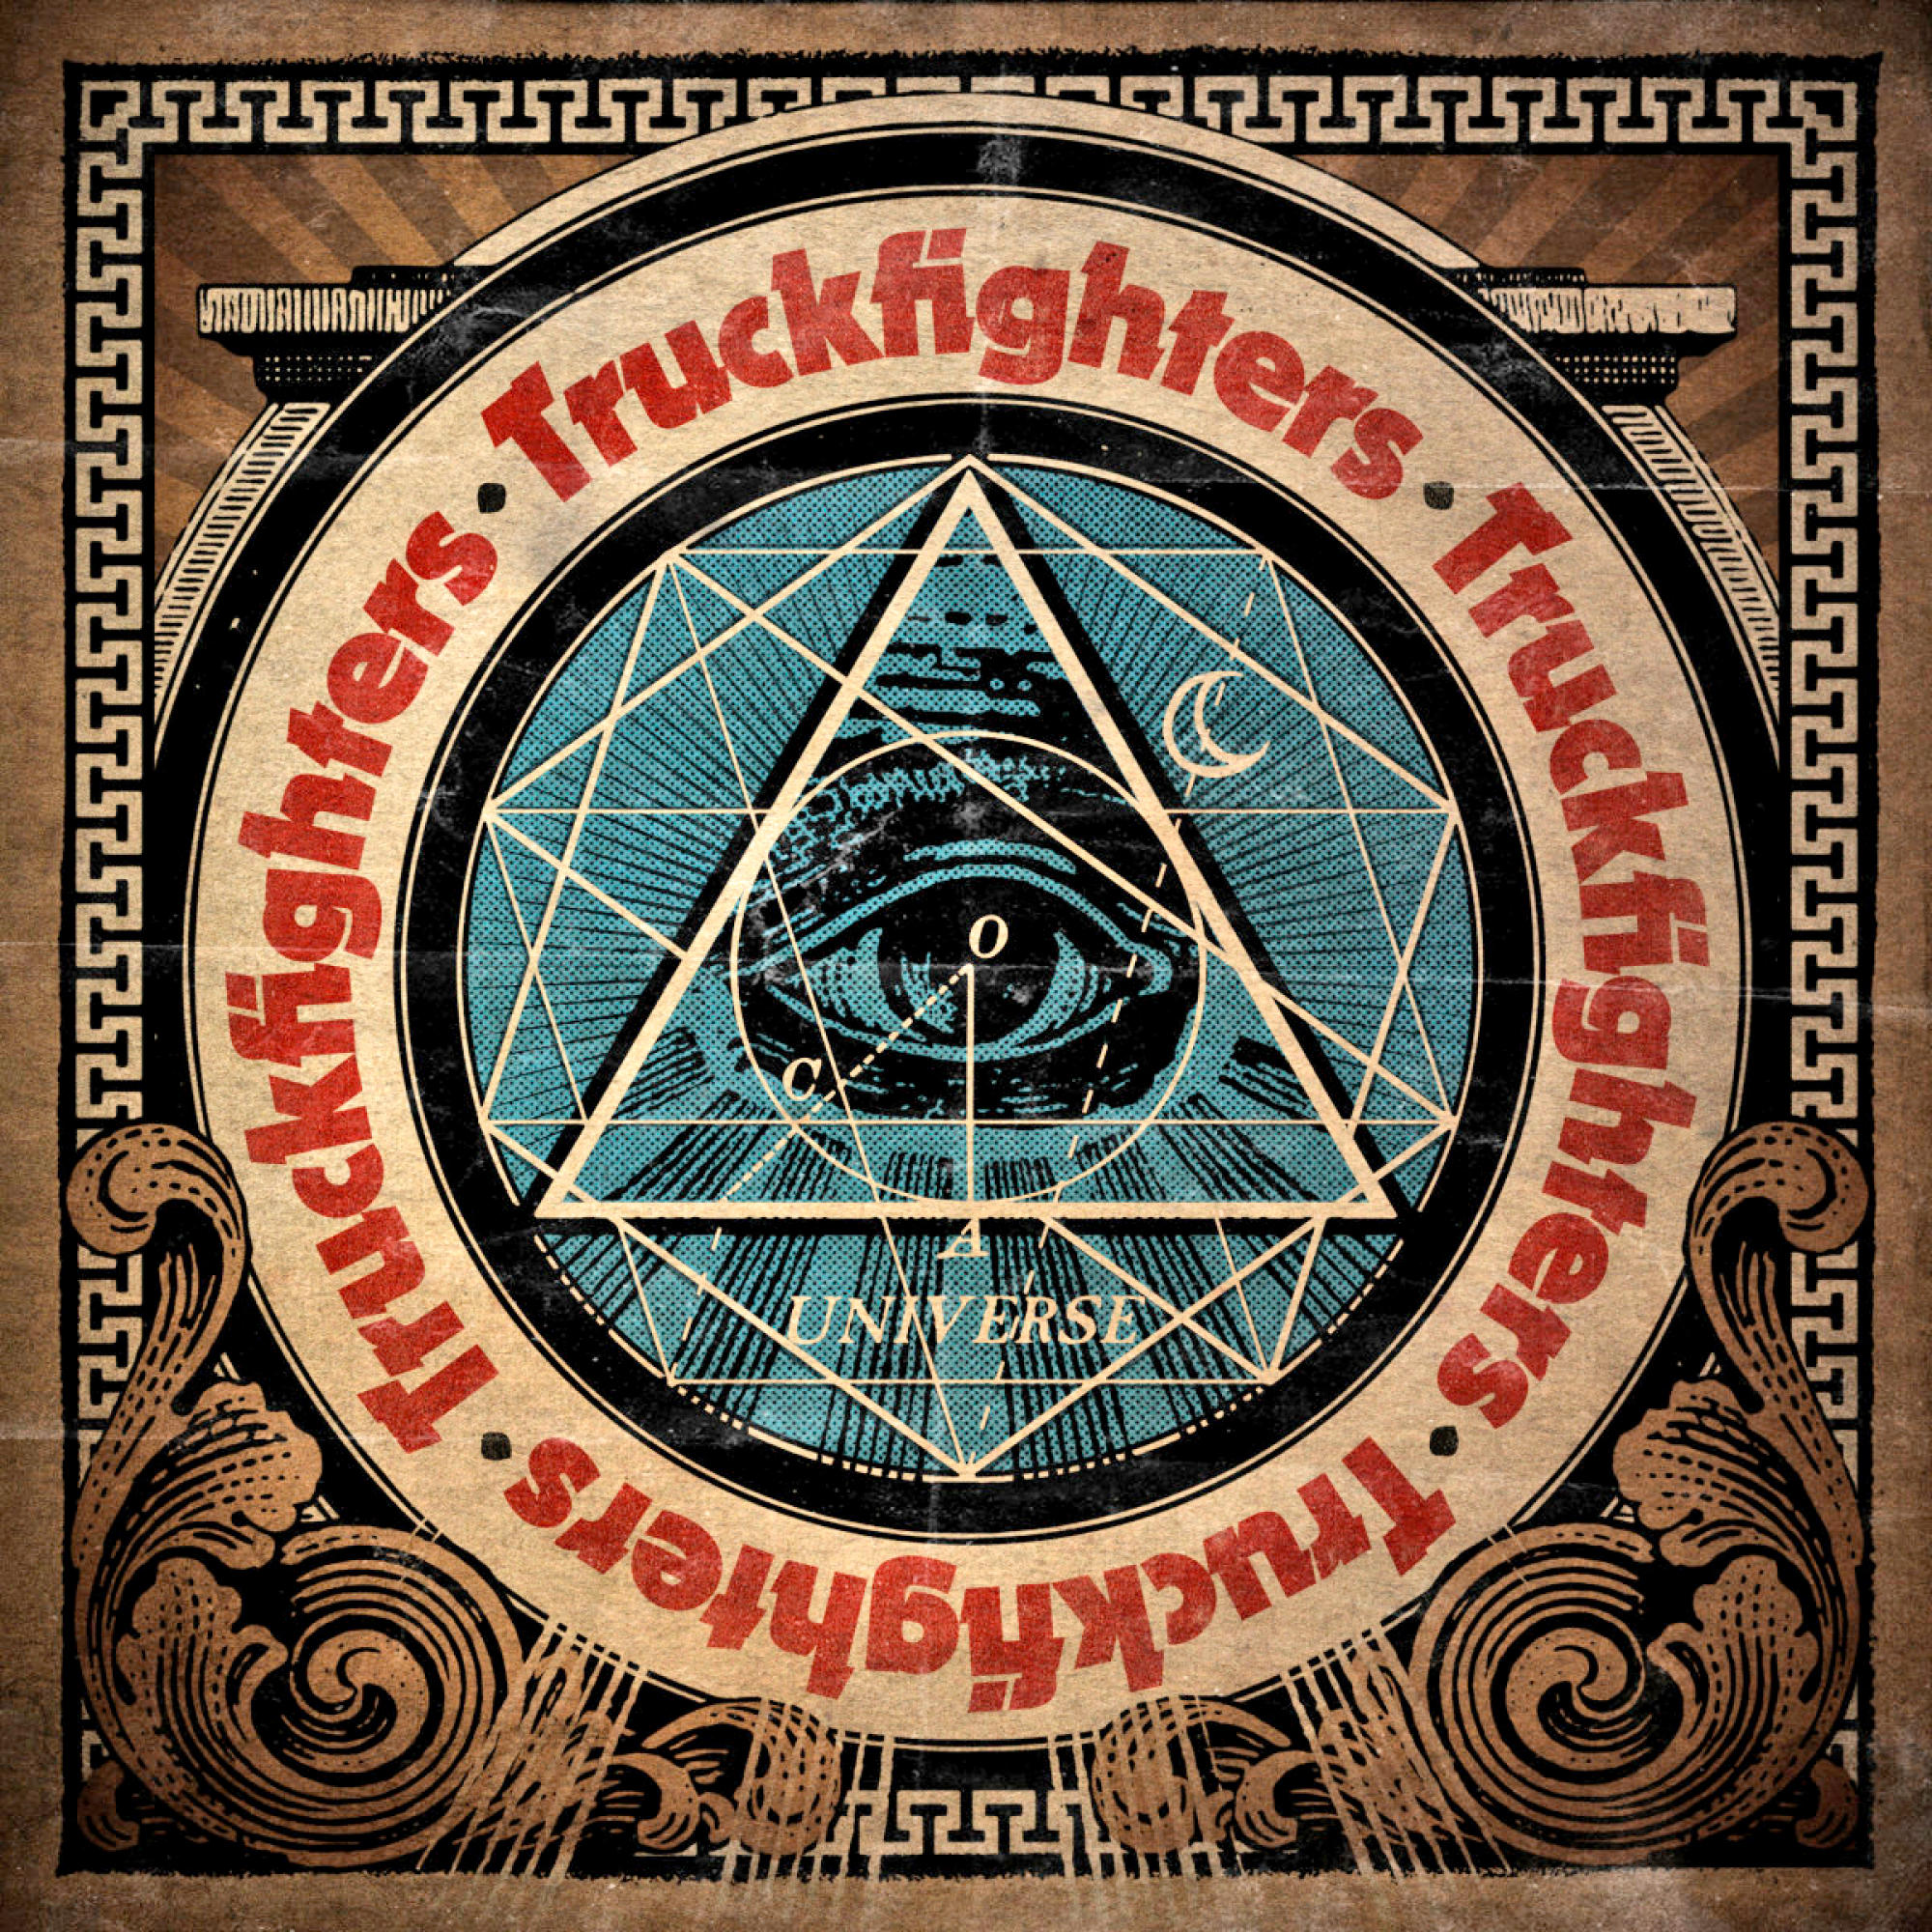 Truckfighters Universe (CD) - -